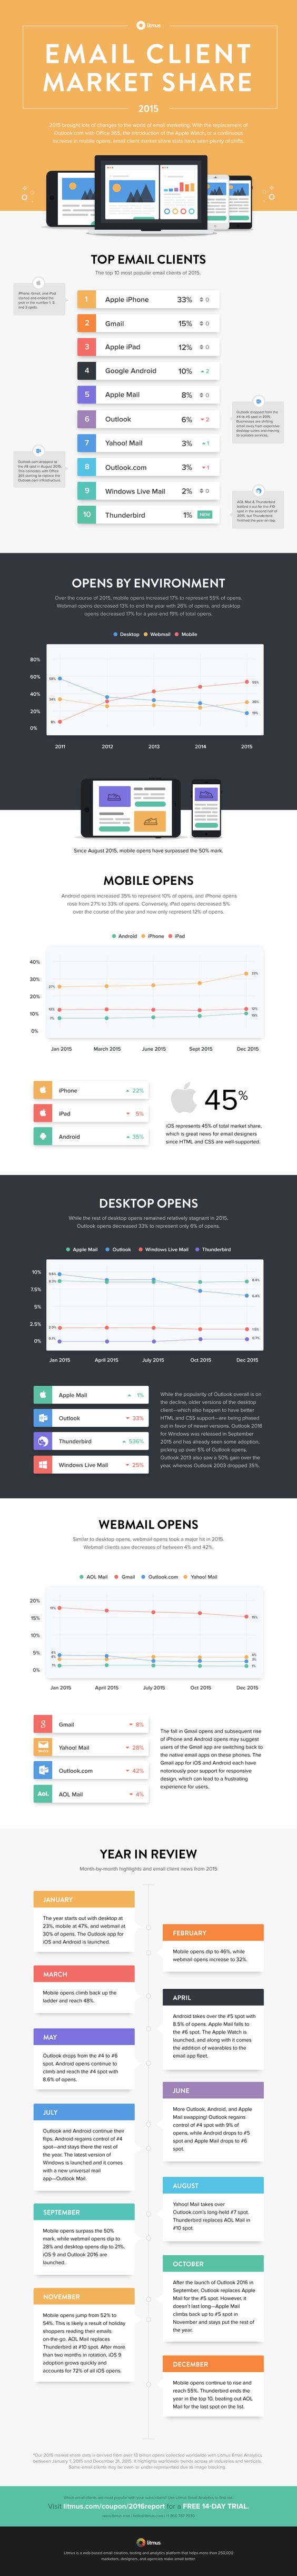 email client market share in 2015